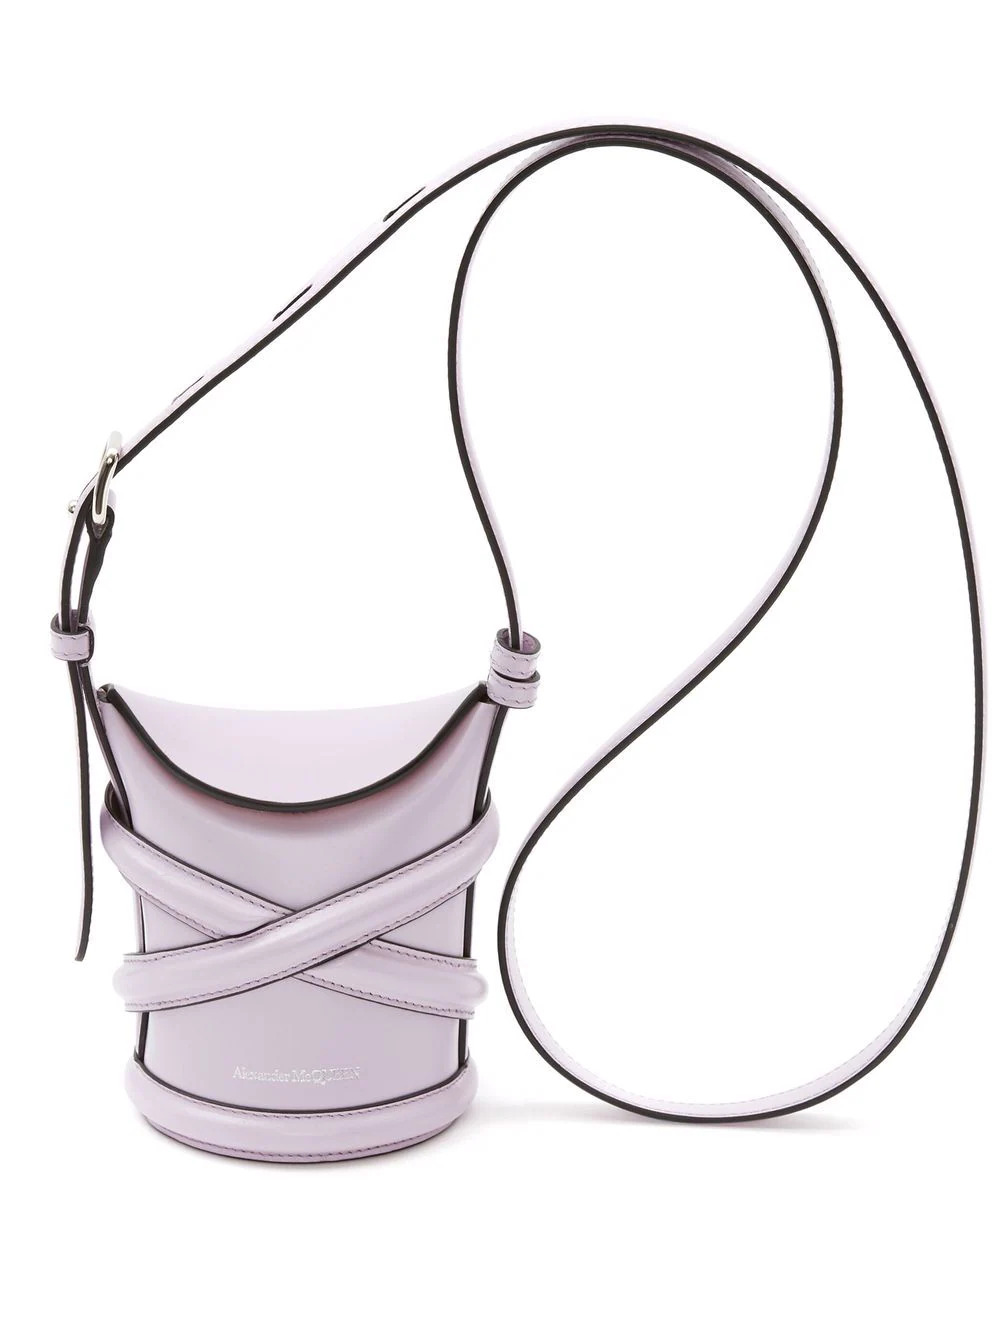 The Curve Tasche in Lila